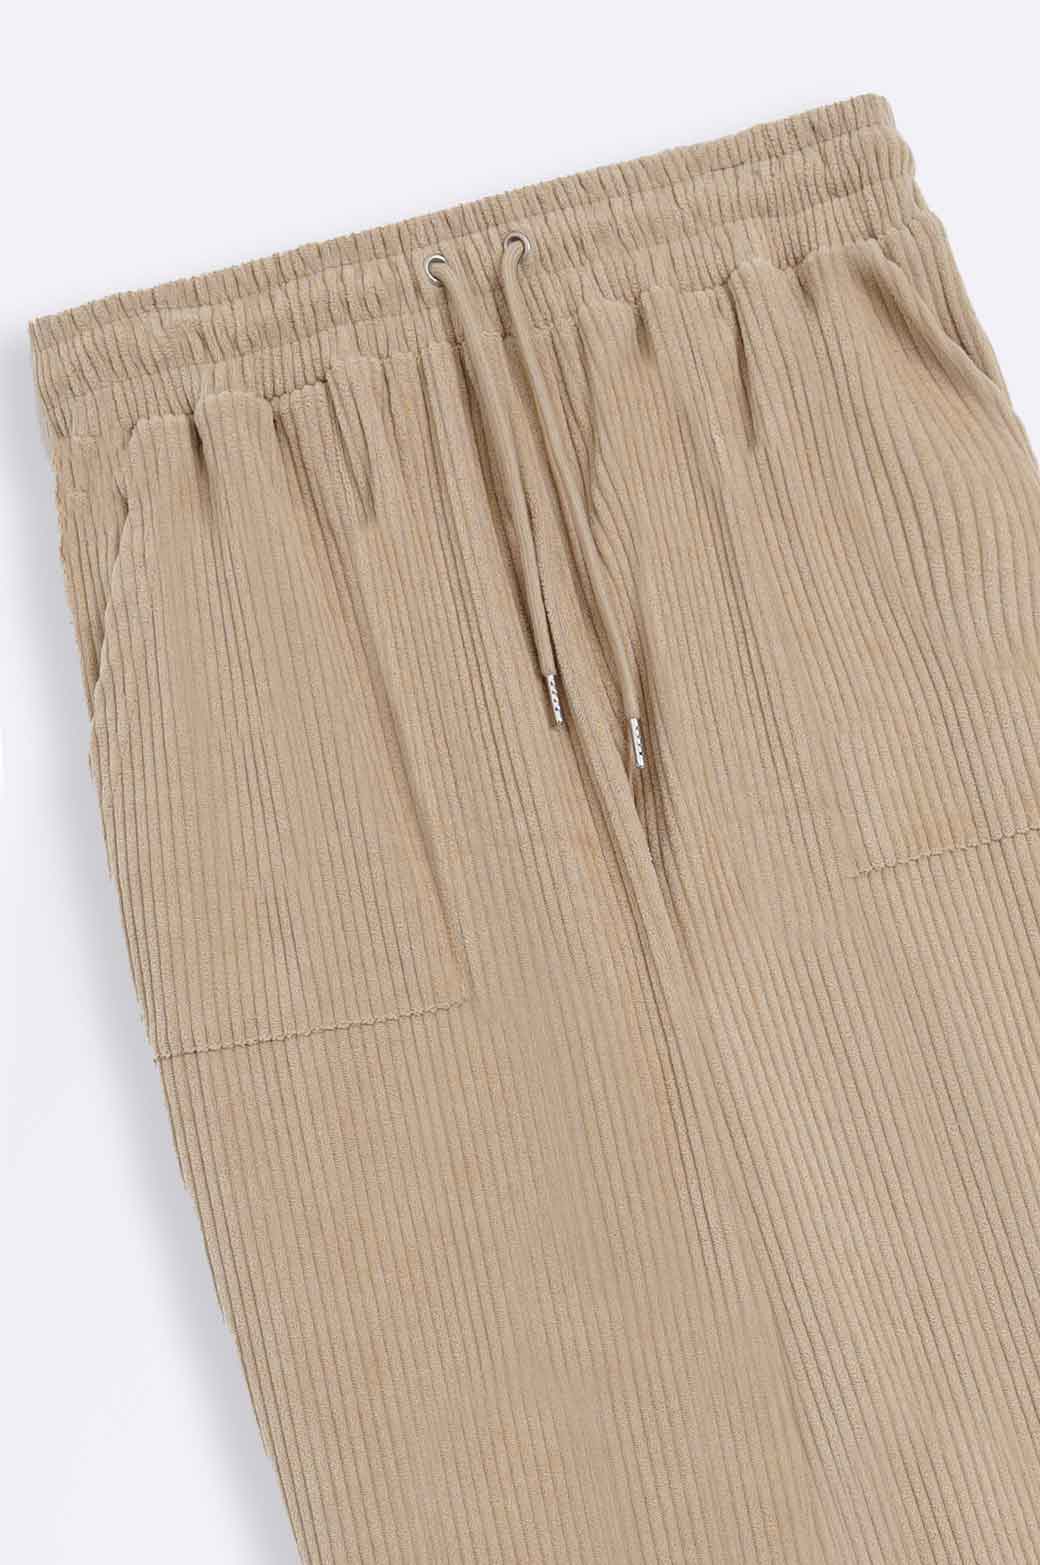 CAMEL RIBBED KNIT TROUSER